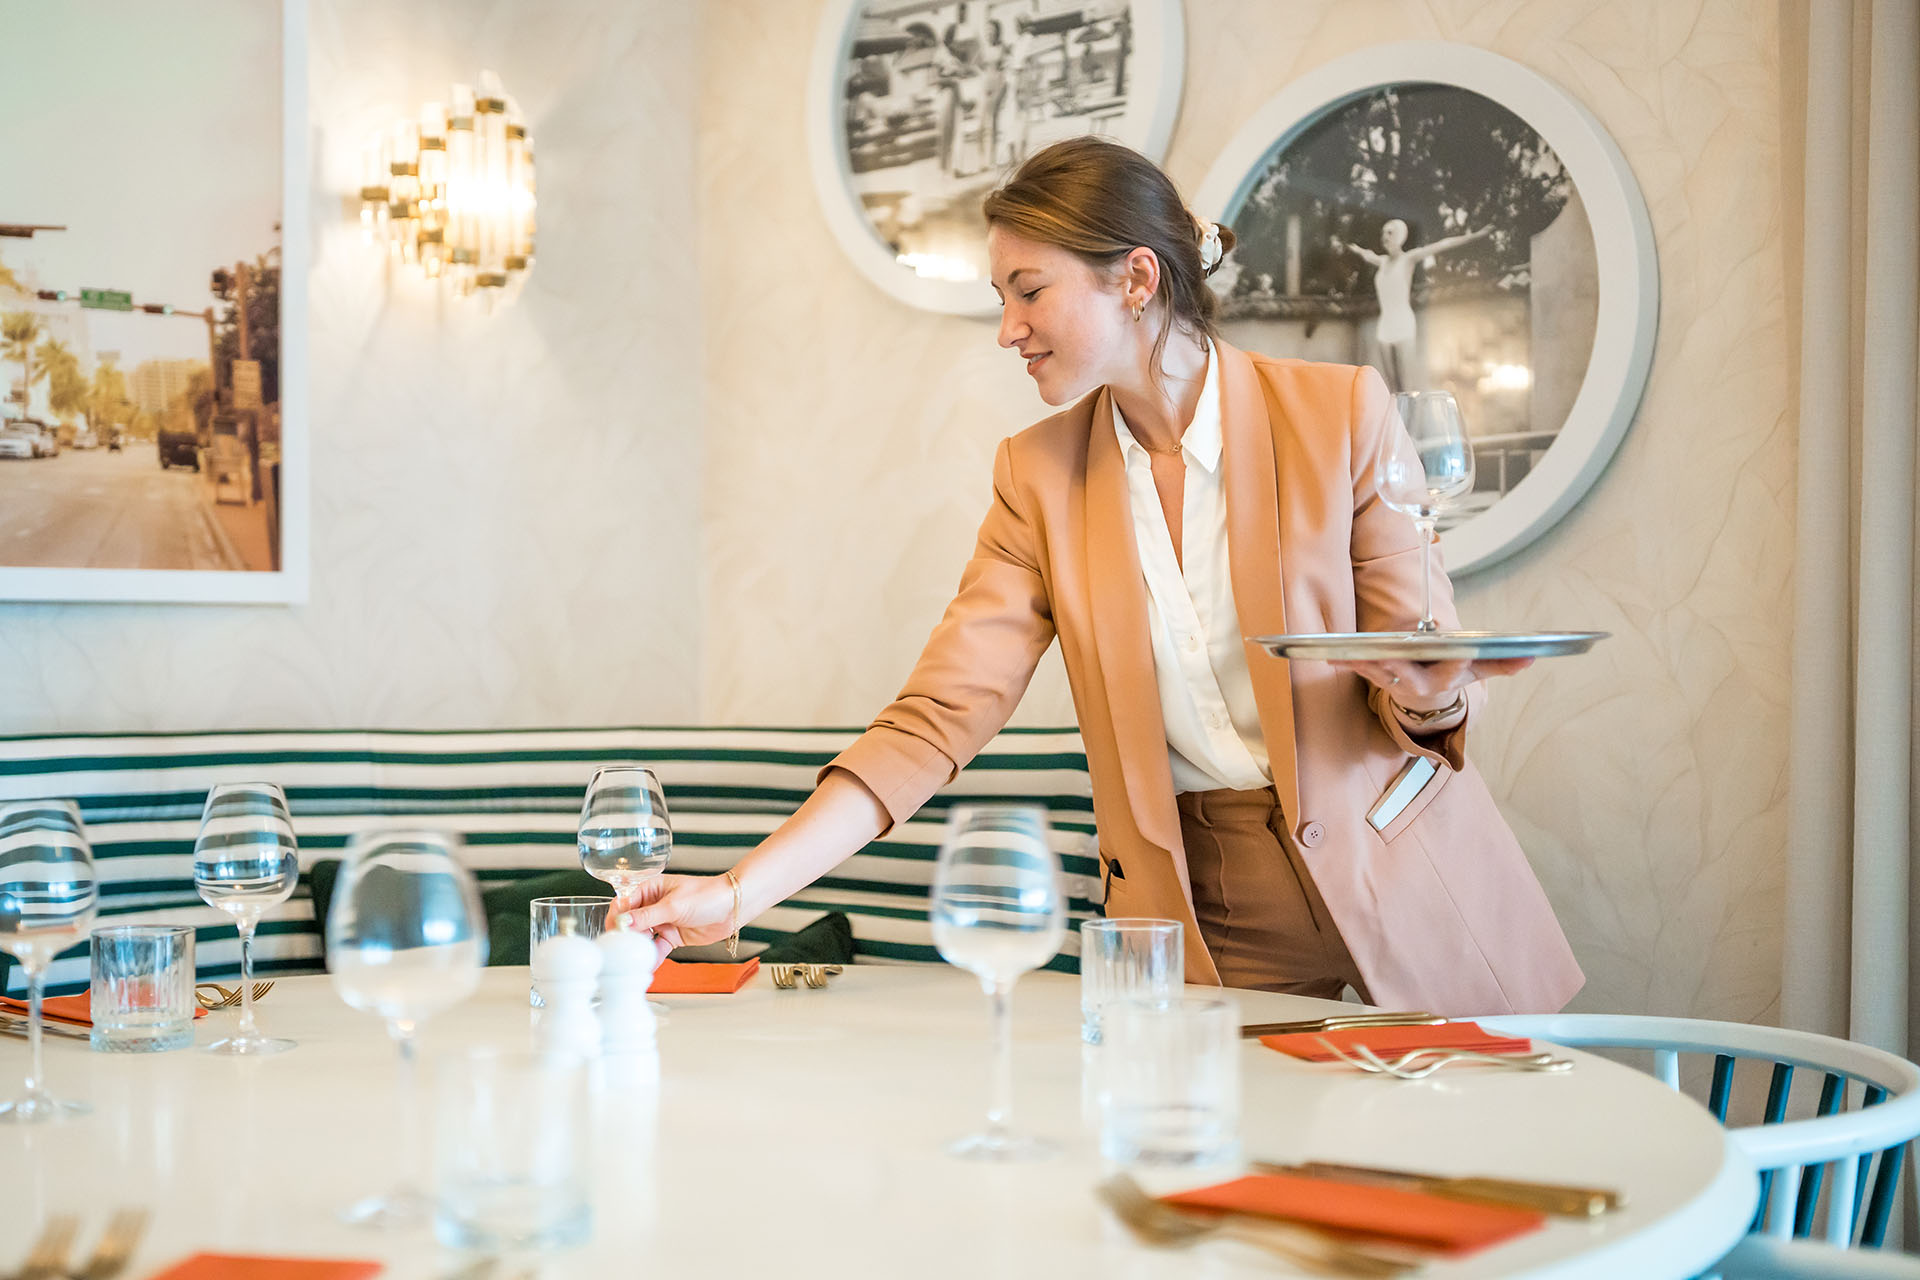 Waitress placing glass onto a table in a stylish restaurant